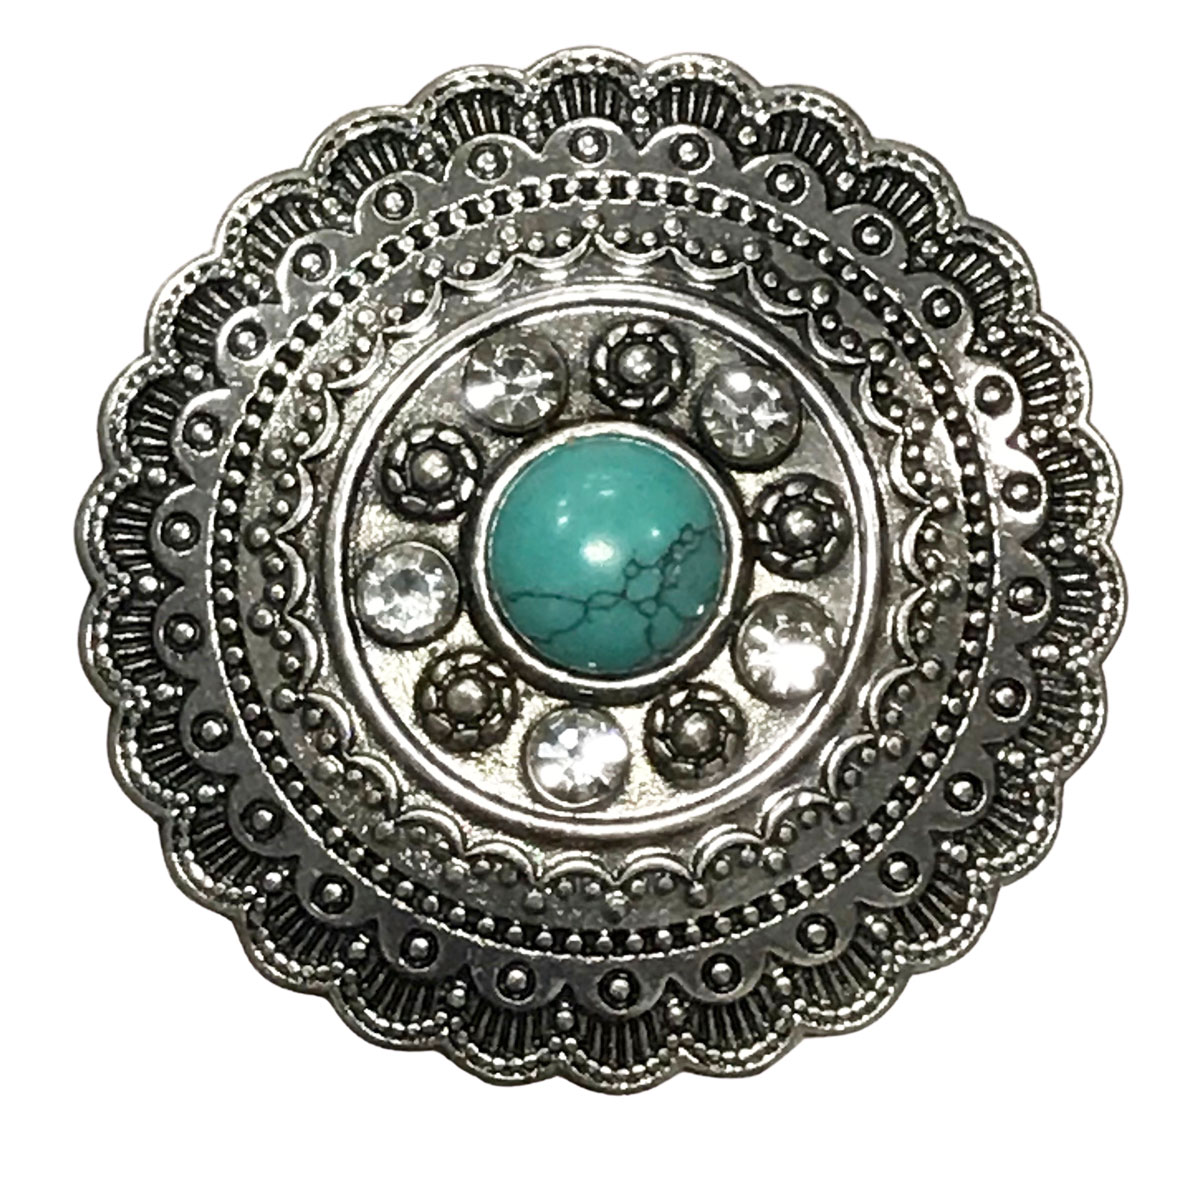 2997 - Artful Design Magnetic Brooches 593 Tree with Hematite Circle Magnetic Brooch 100 2/25 - 2